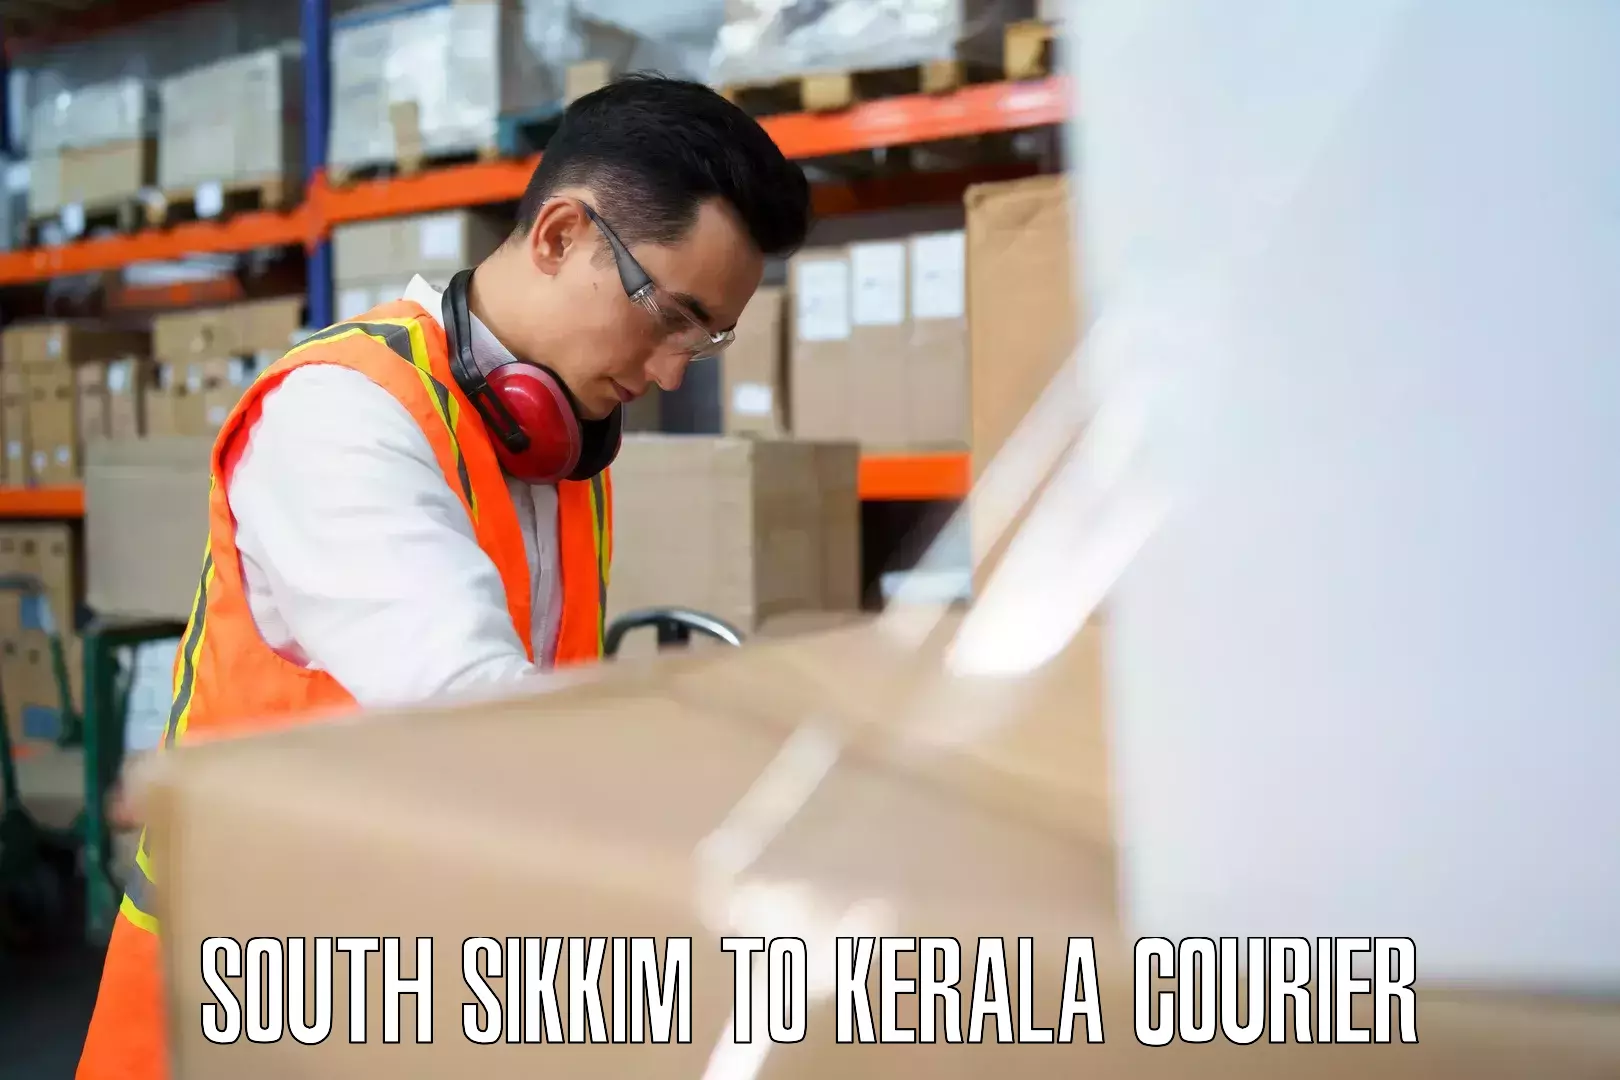 Luggage shipment tracking South Sikkim to Kollam